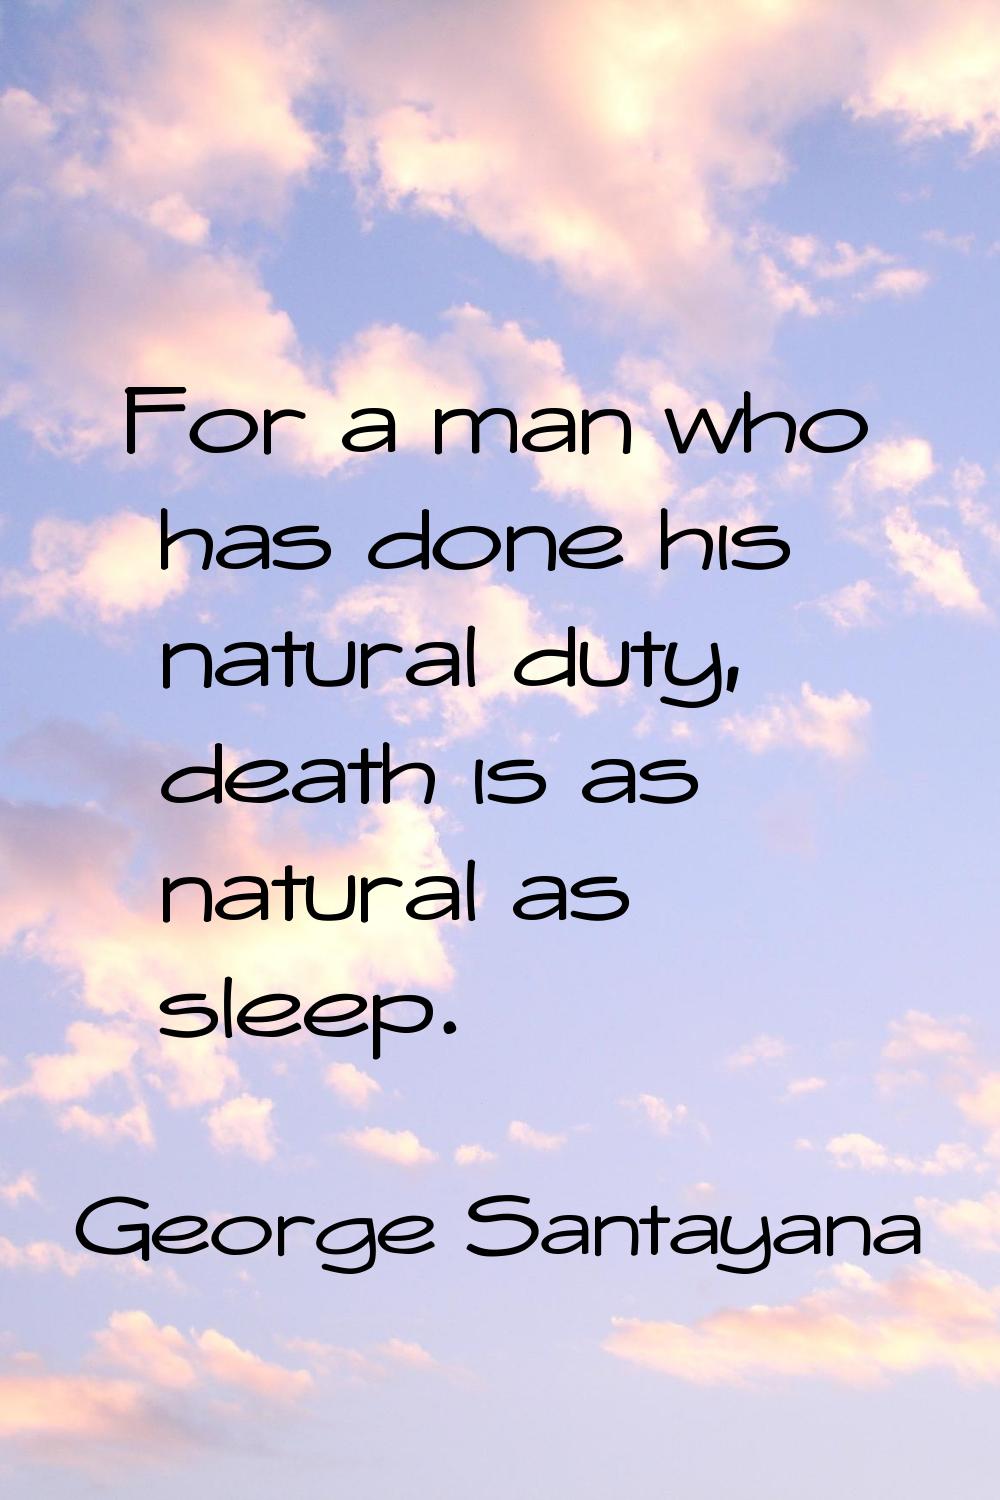 For a man who has done his natural duty, death is as natural as sleep.